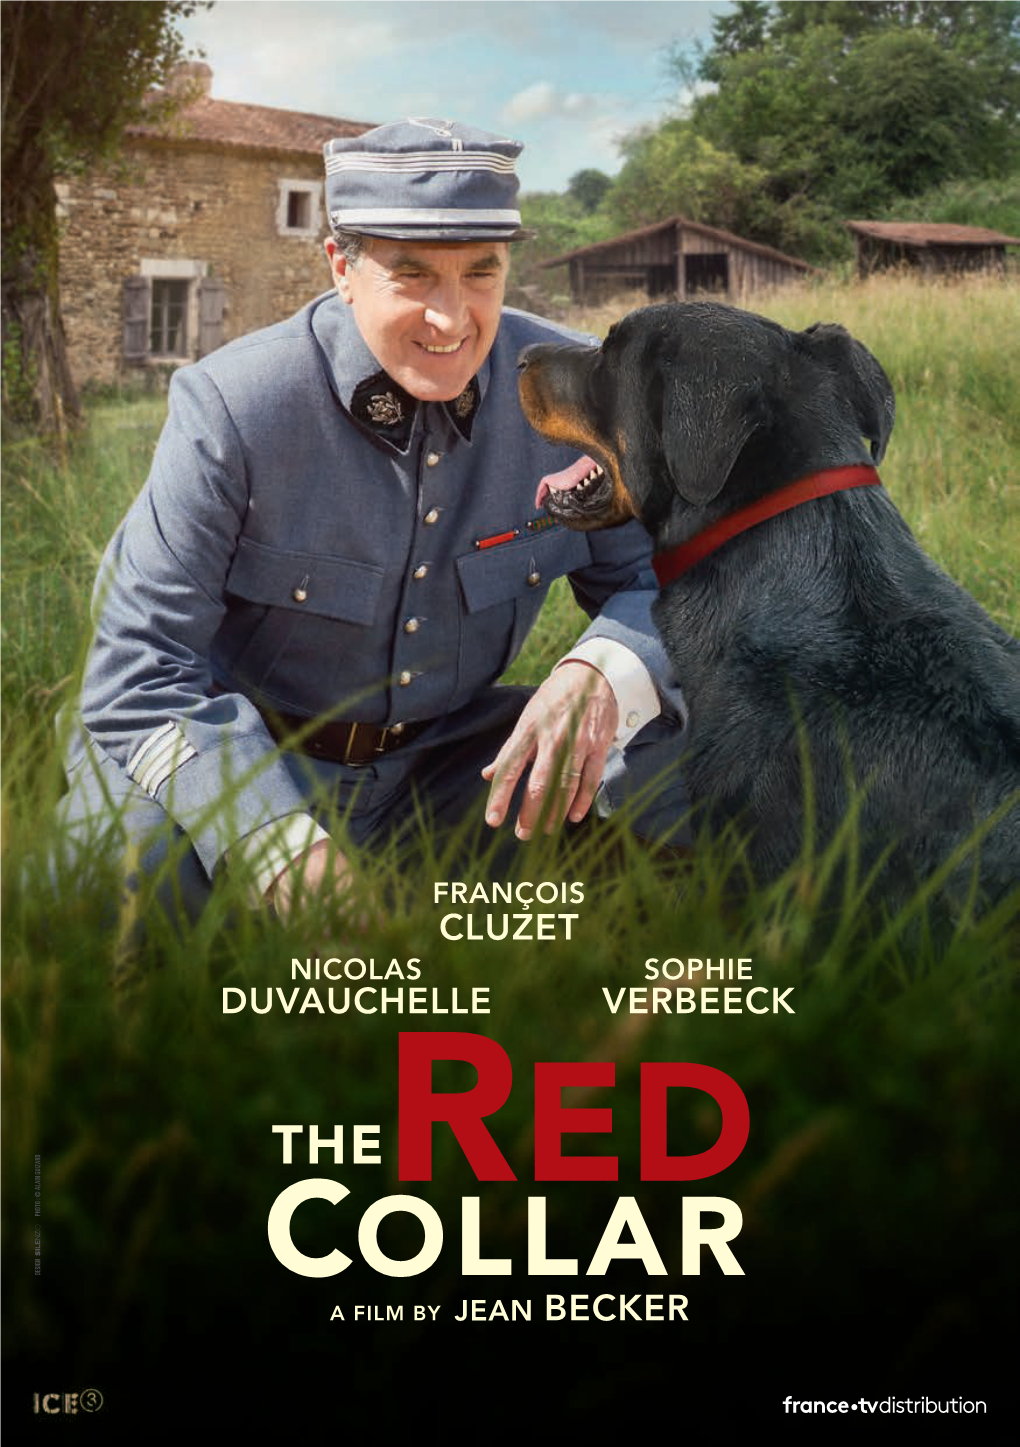 The Red Collar a Fi Lm by JEAN BECKER